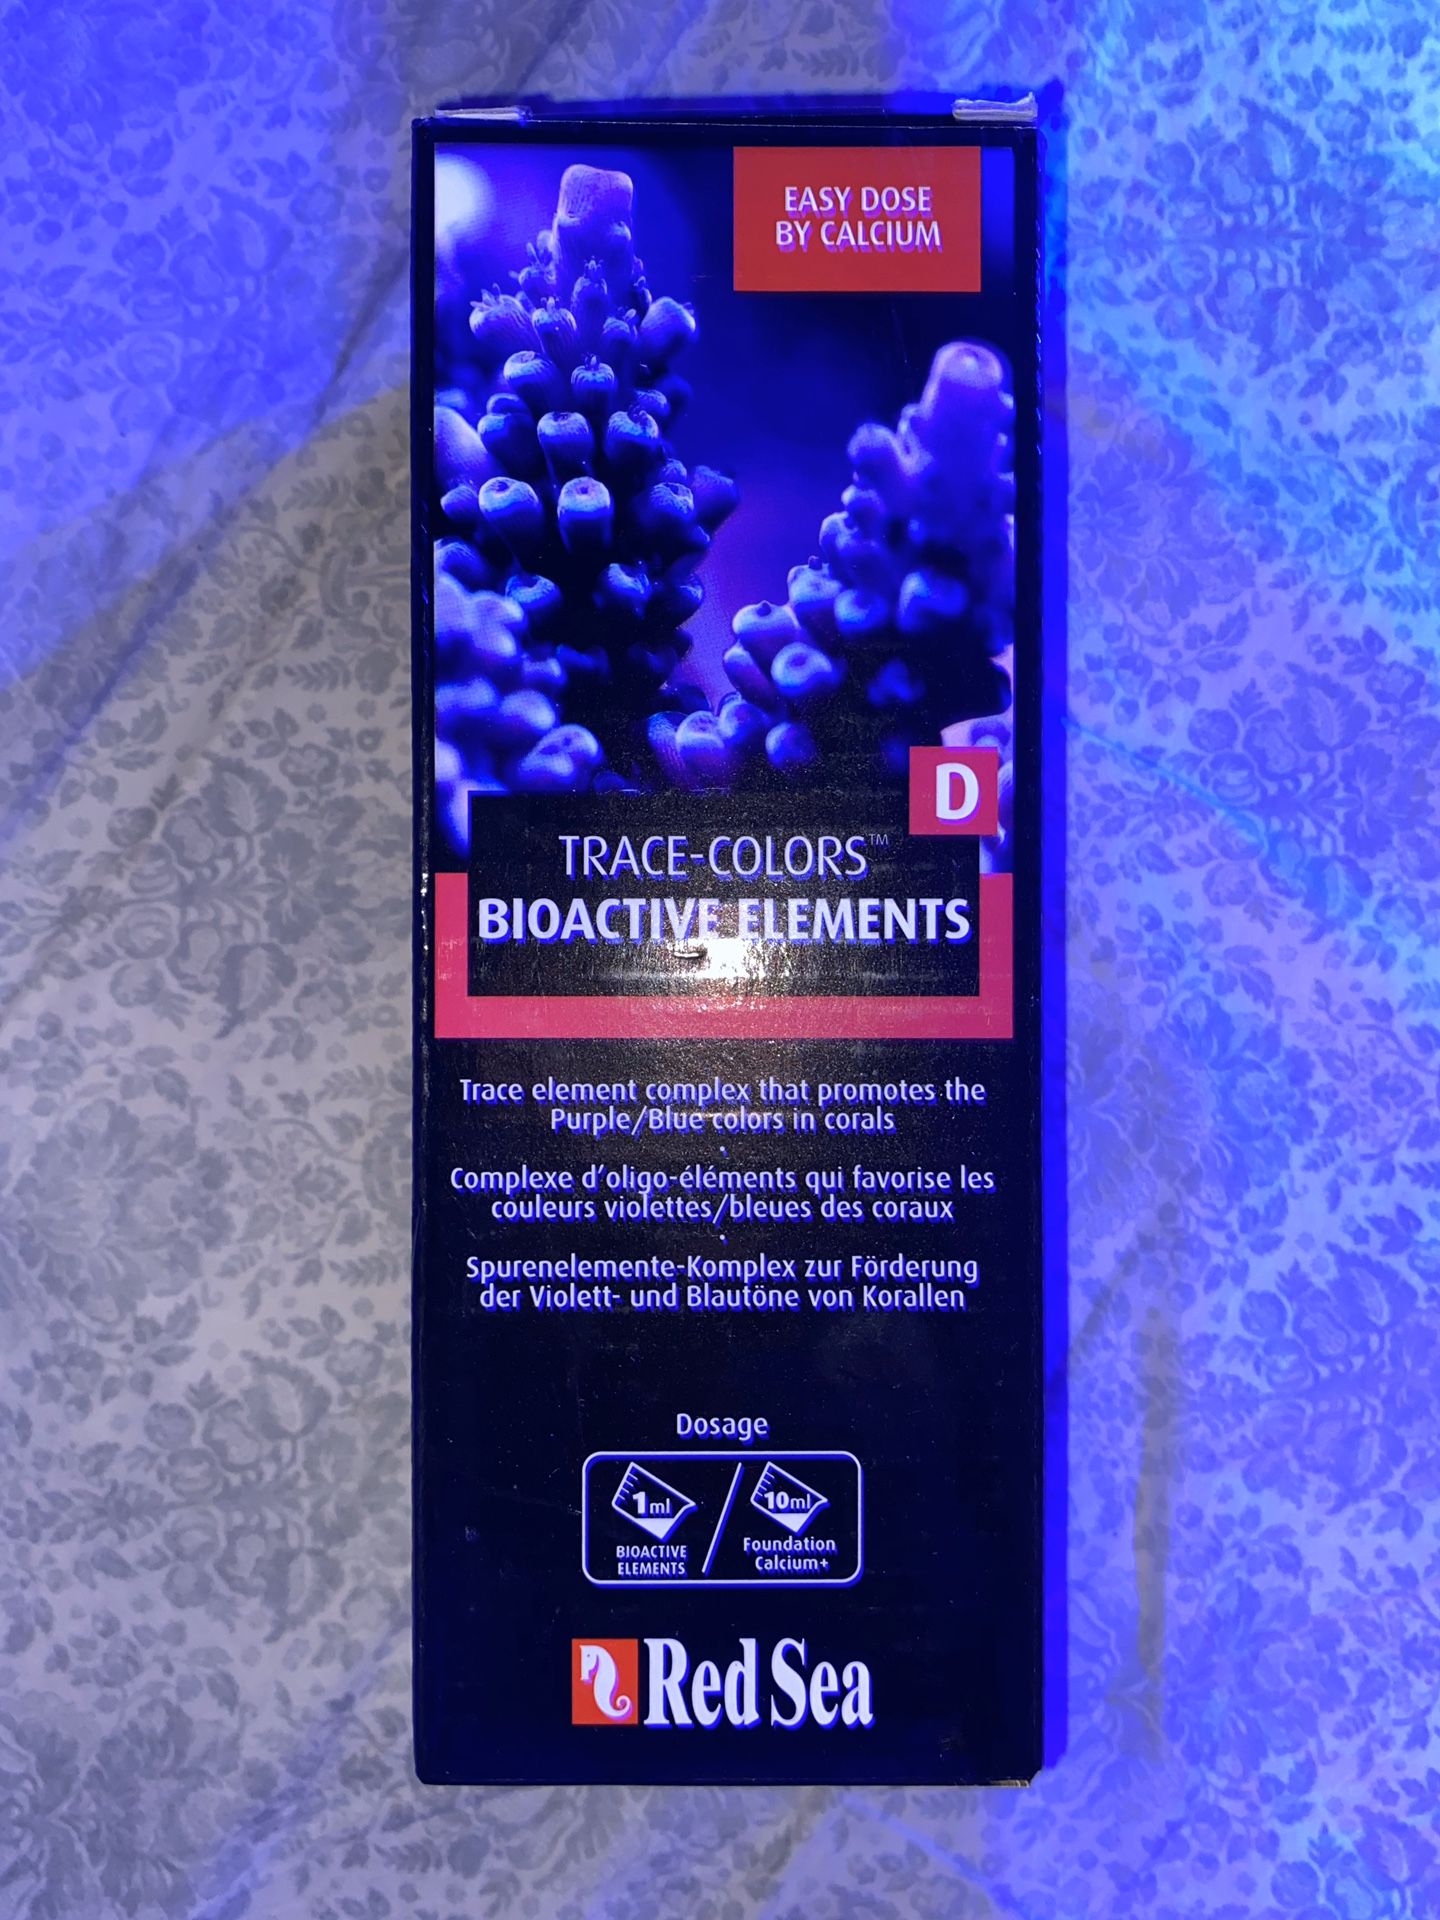 NWT NIB Red Sea Trace Colors Bioactive Elements D Saltwater Fish Tank Supply